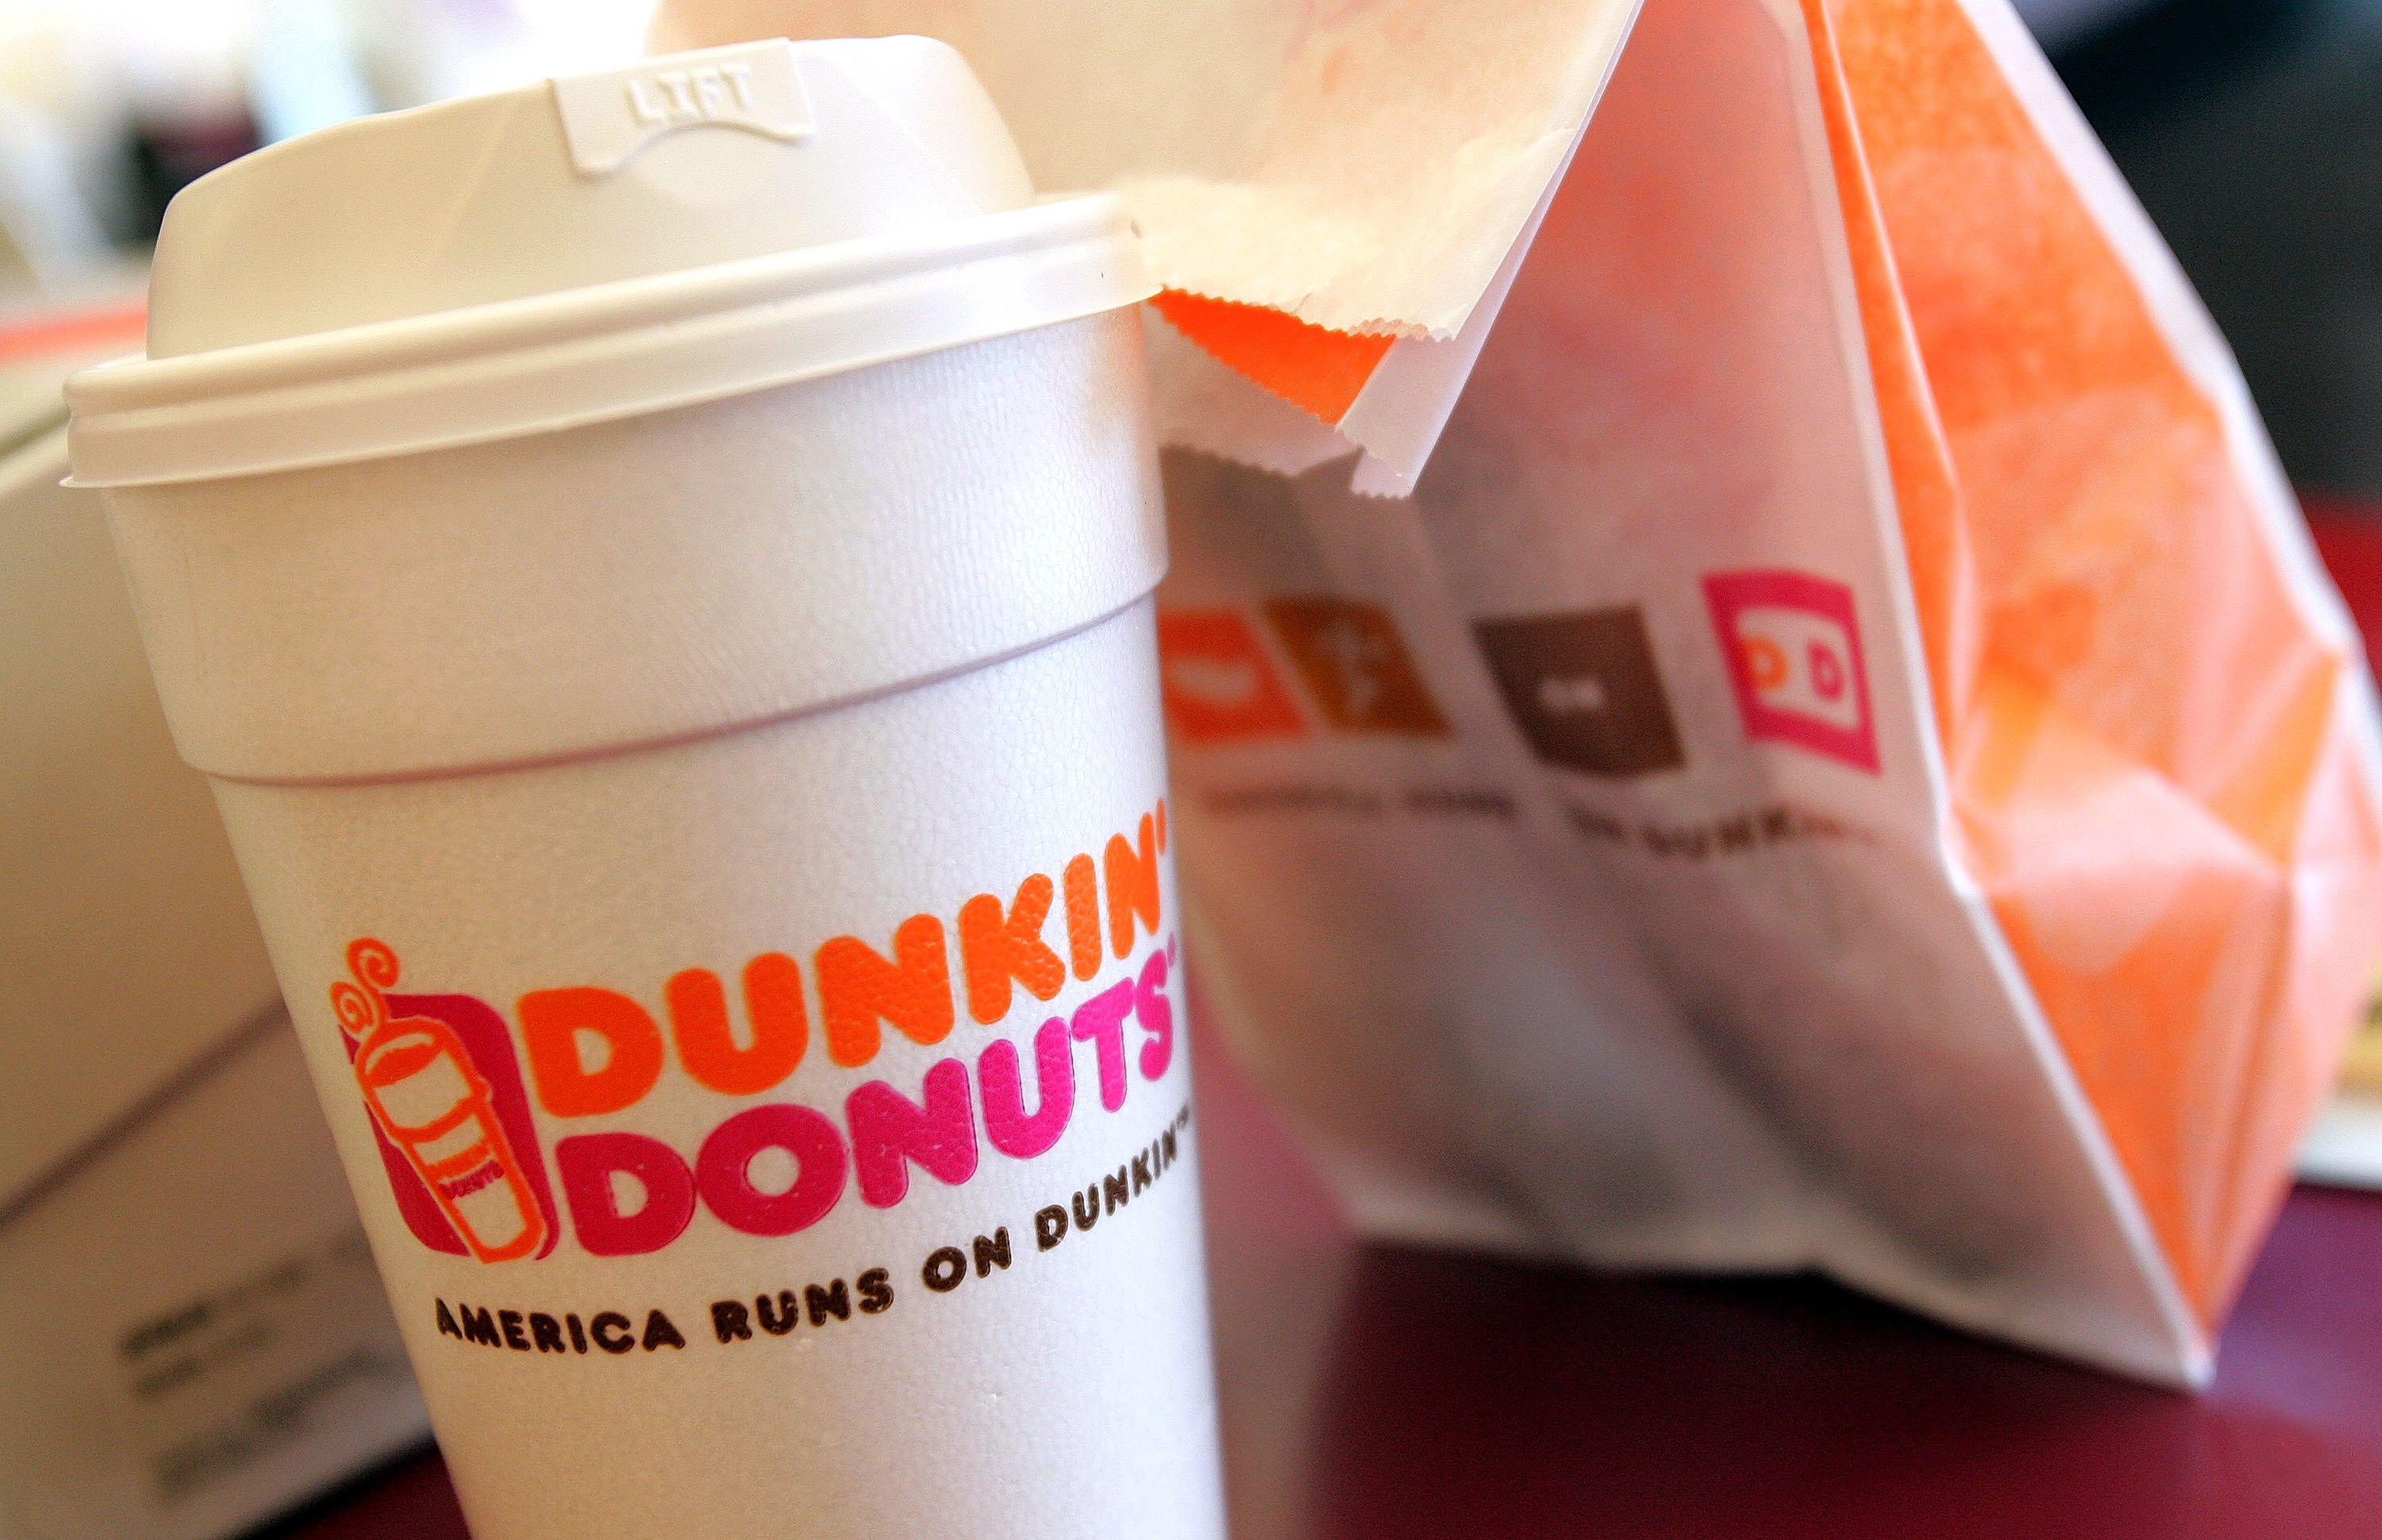 Dunkin Donuts employees fired after pouring water on homeless person